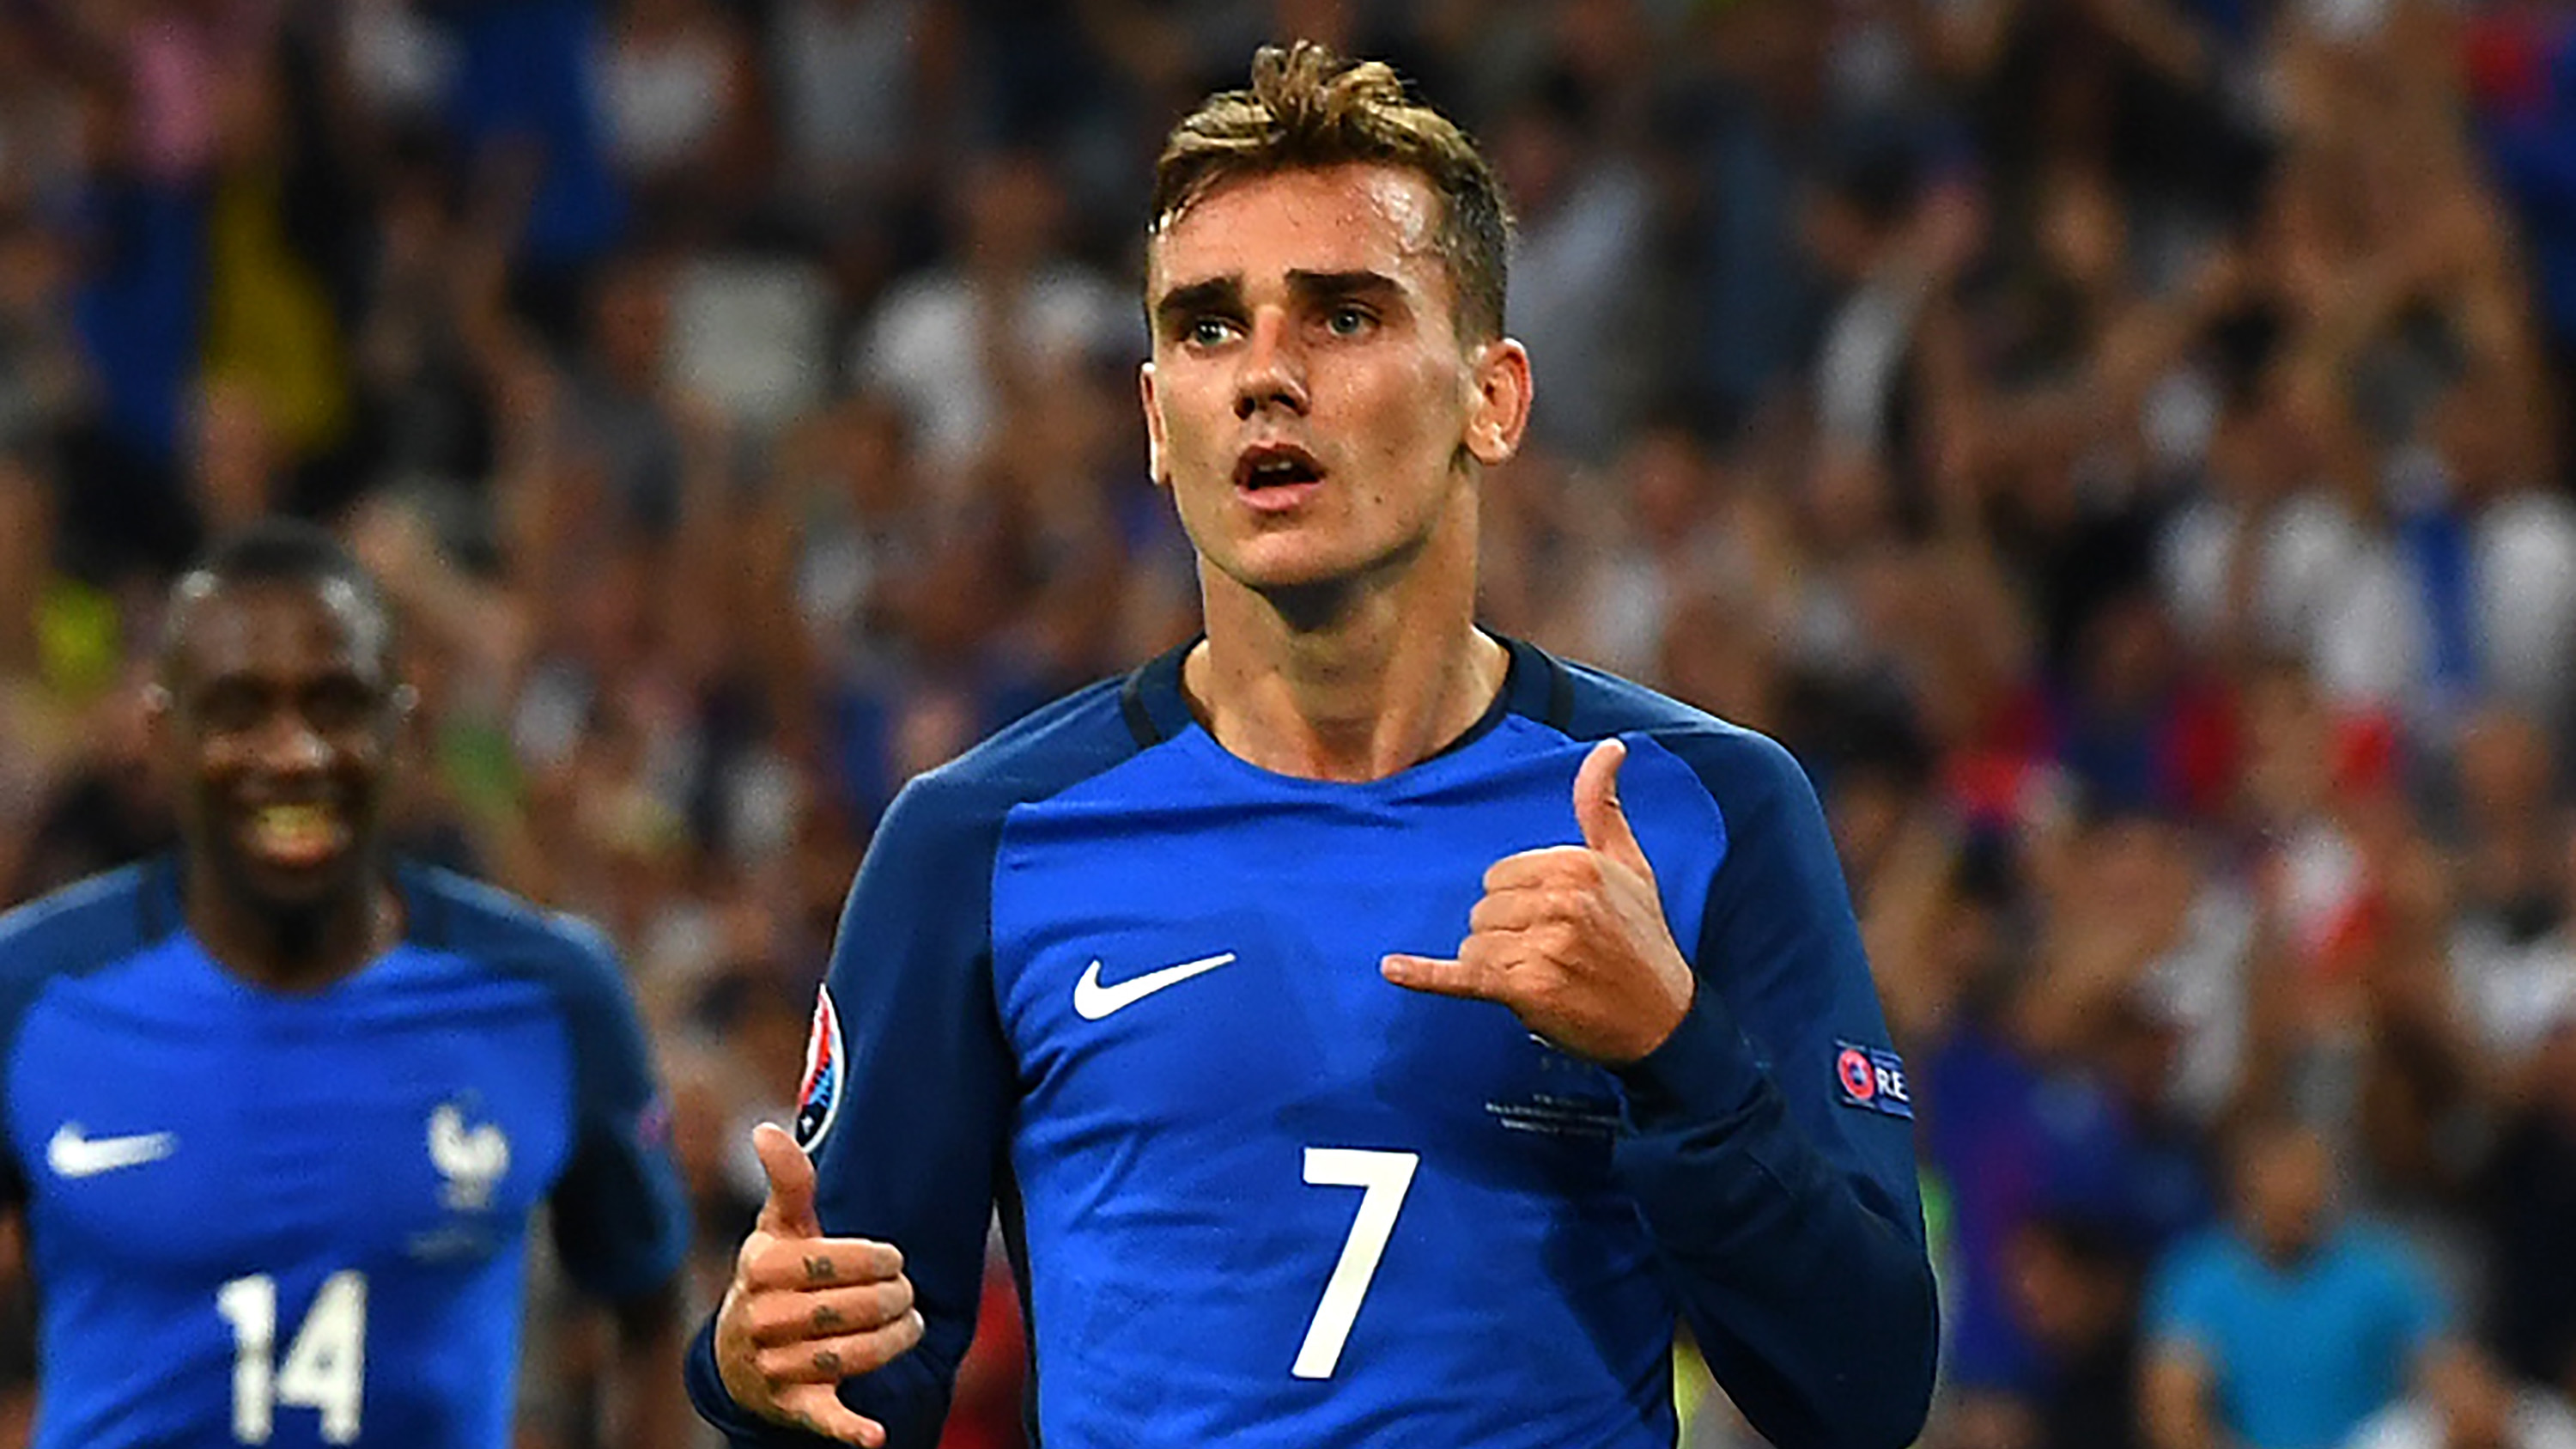 Revealed Where Did Griezmann Get His Celebration From